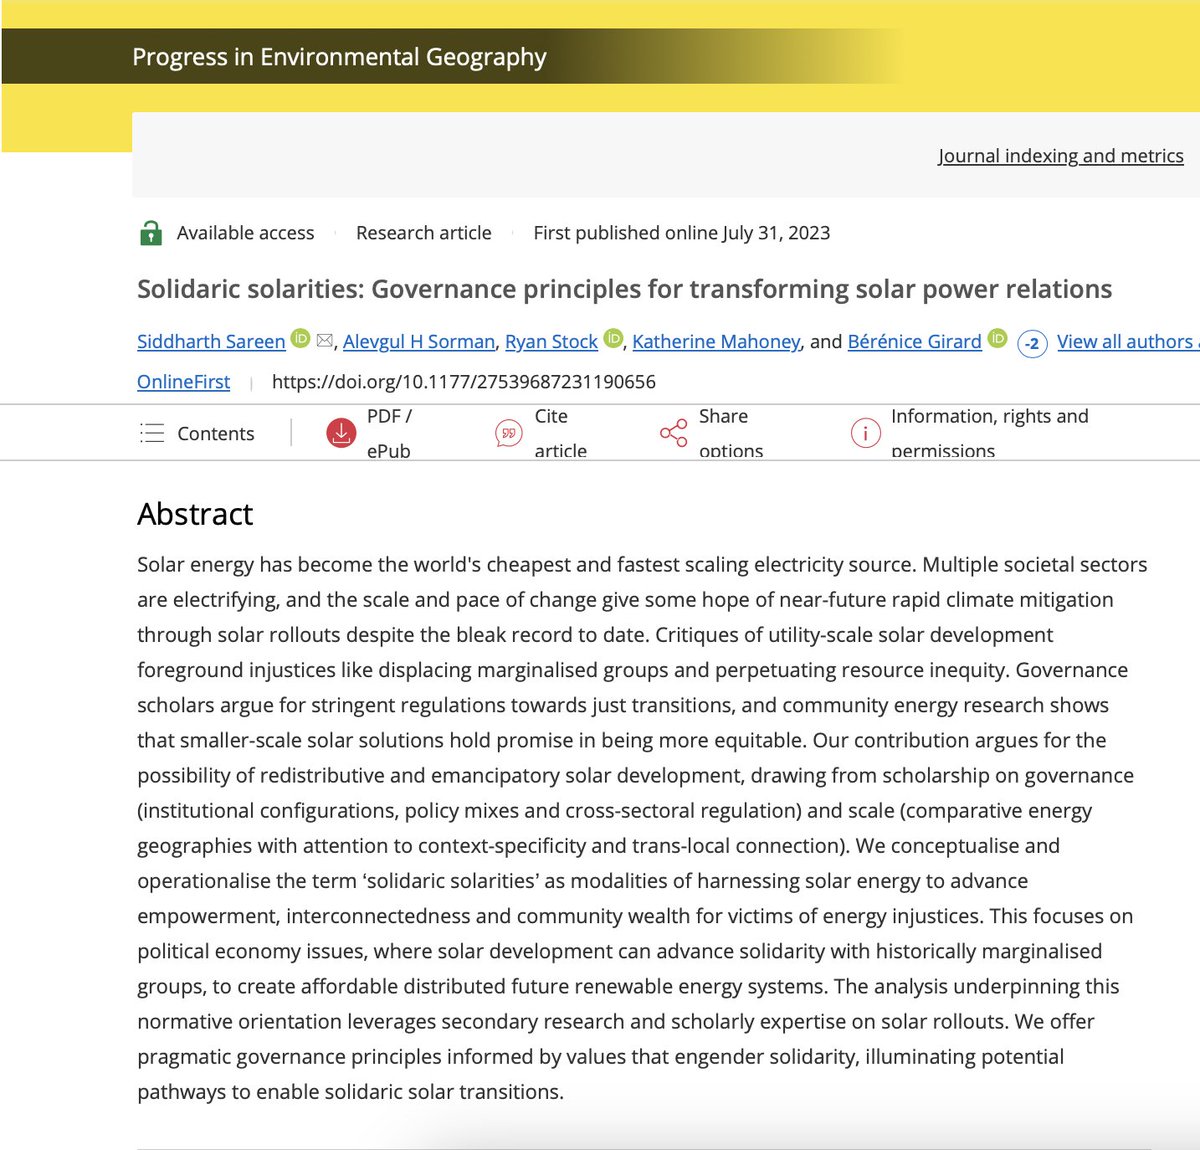 NEW ARTICLE ALERT! 'Solidaric solarities: Governance principles for transforming solar power relations' is now published in @progenvgeog @SAGEPublishers with the fortuitous teaming up of @AlevgulS @ryanjstock @KatMahoney6 @bereapondy: doi.org/10.1177/275396… - a cool summer read!